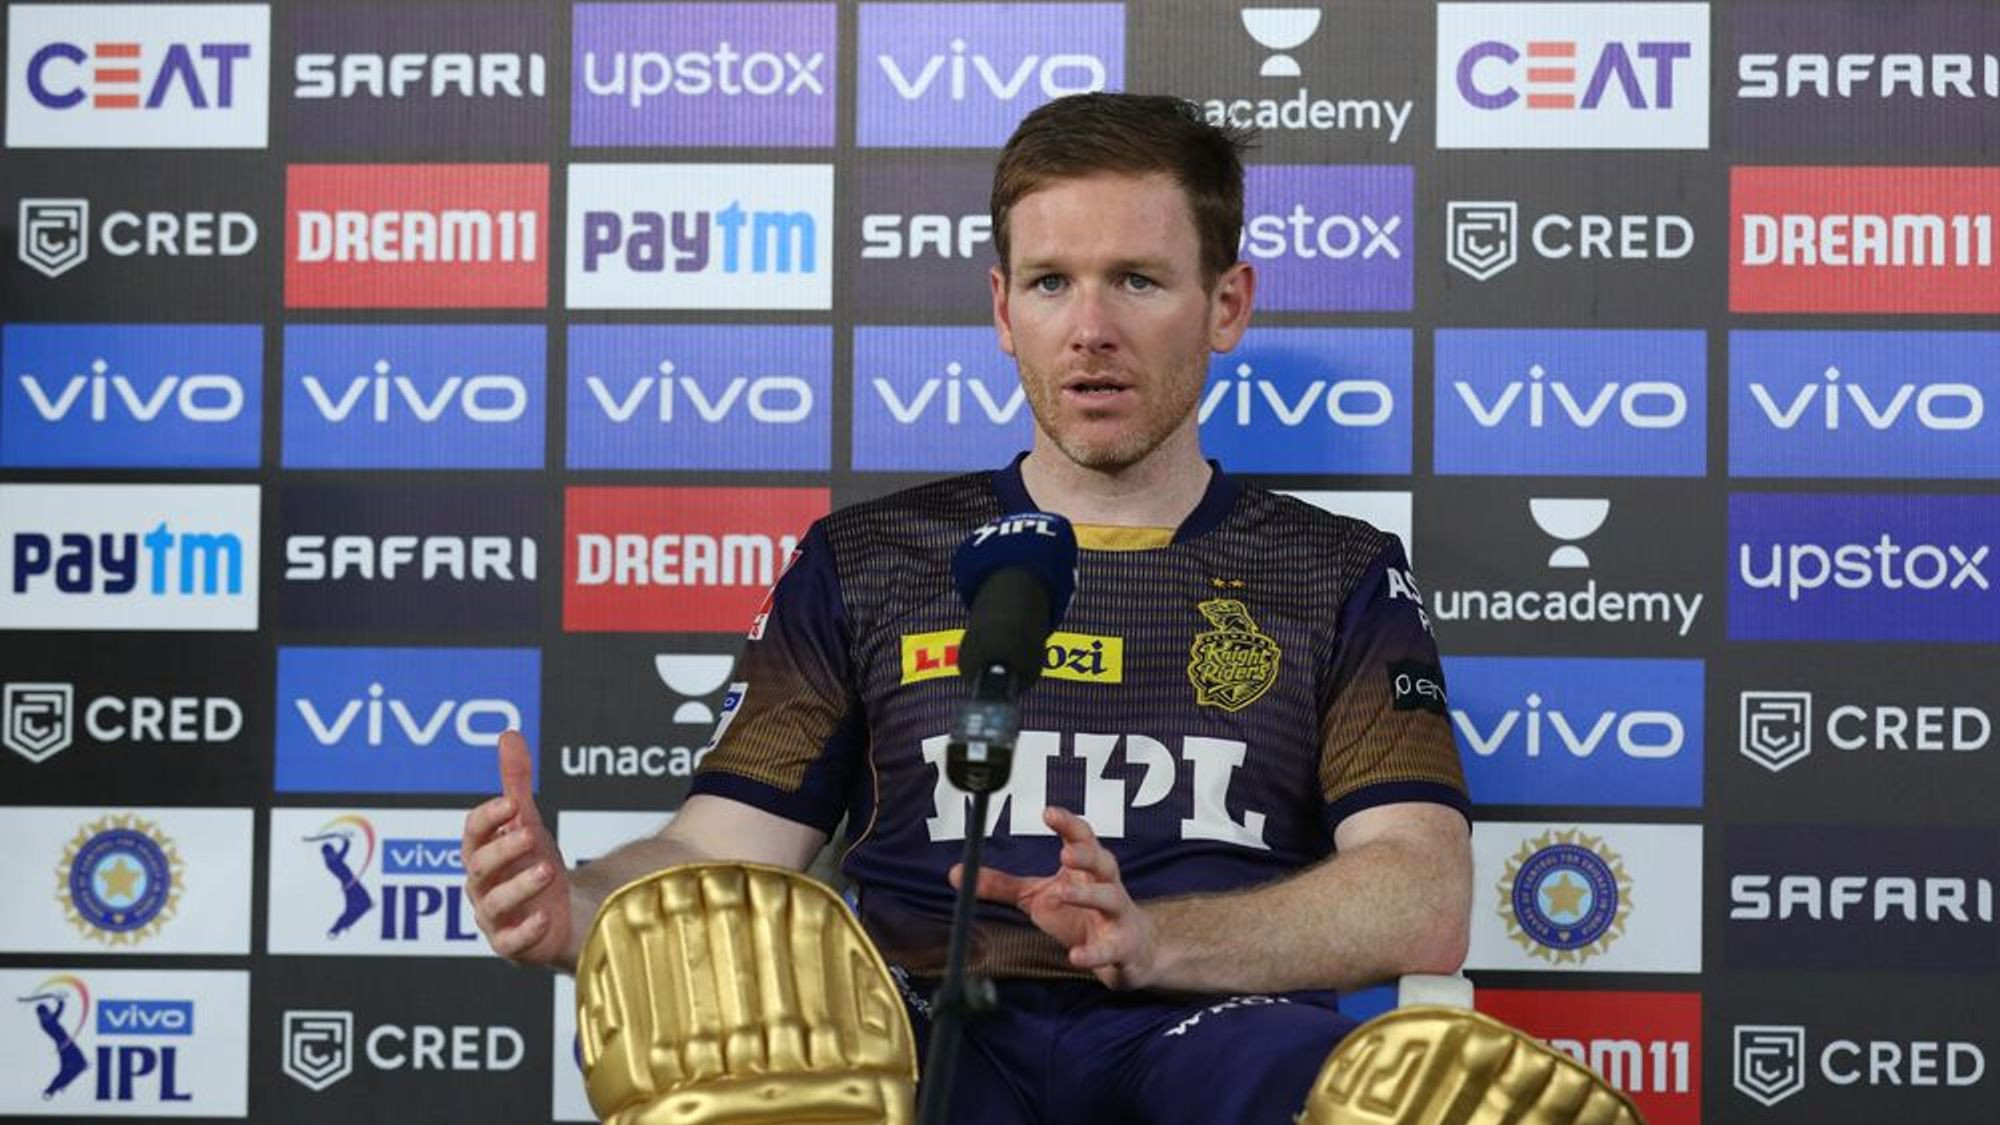 IPL 2021: Eoin Morgan says talent alone cannot win KKR matches, need to execute their plans